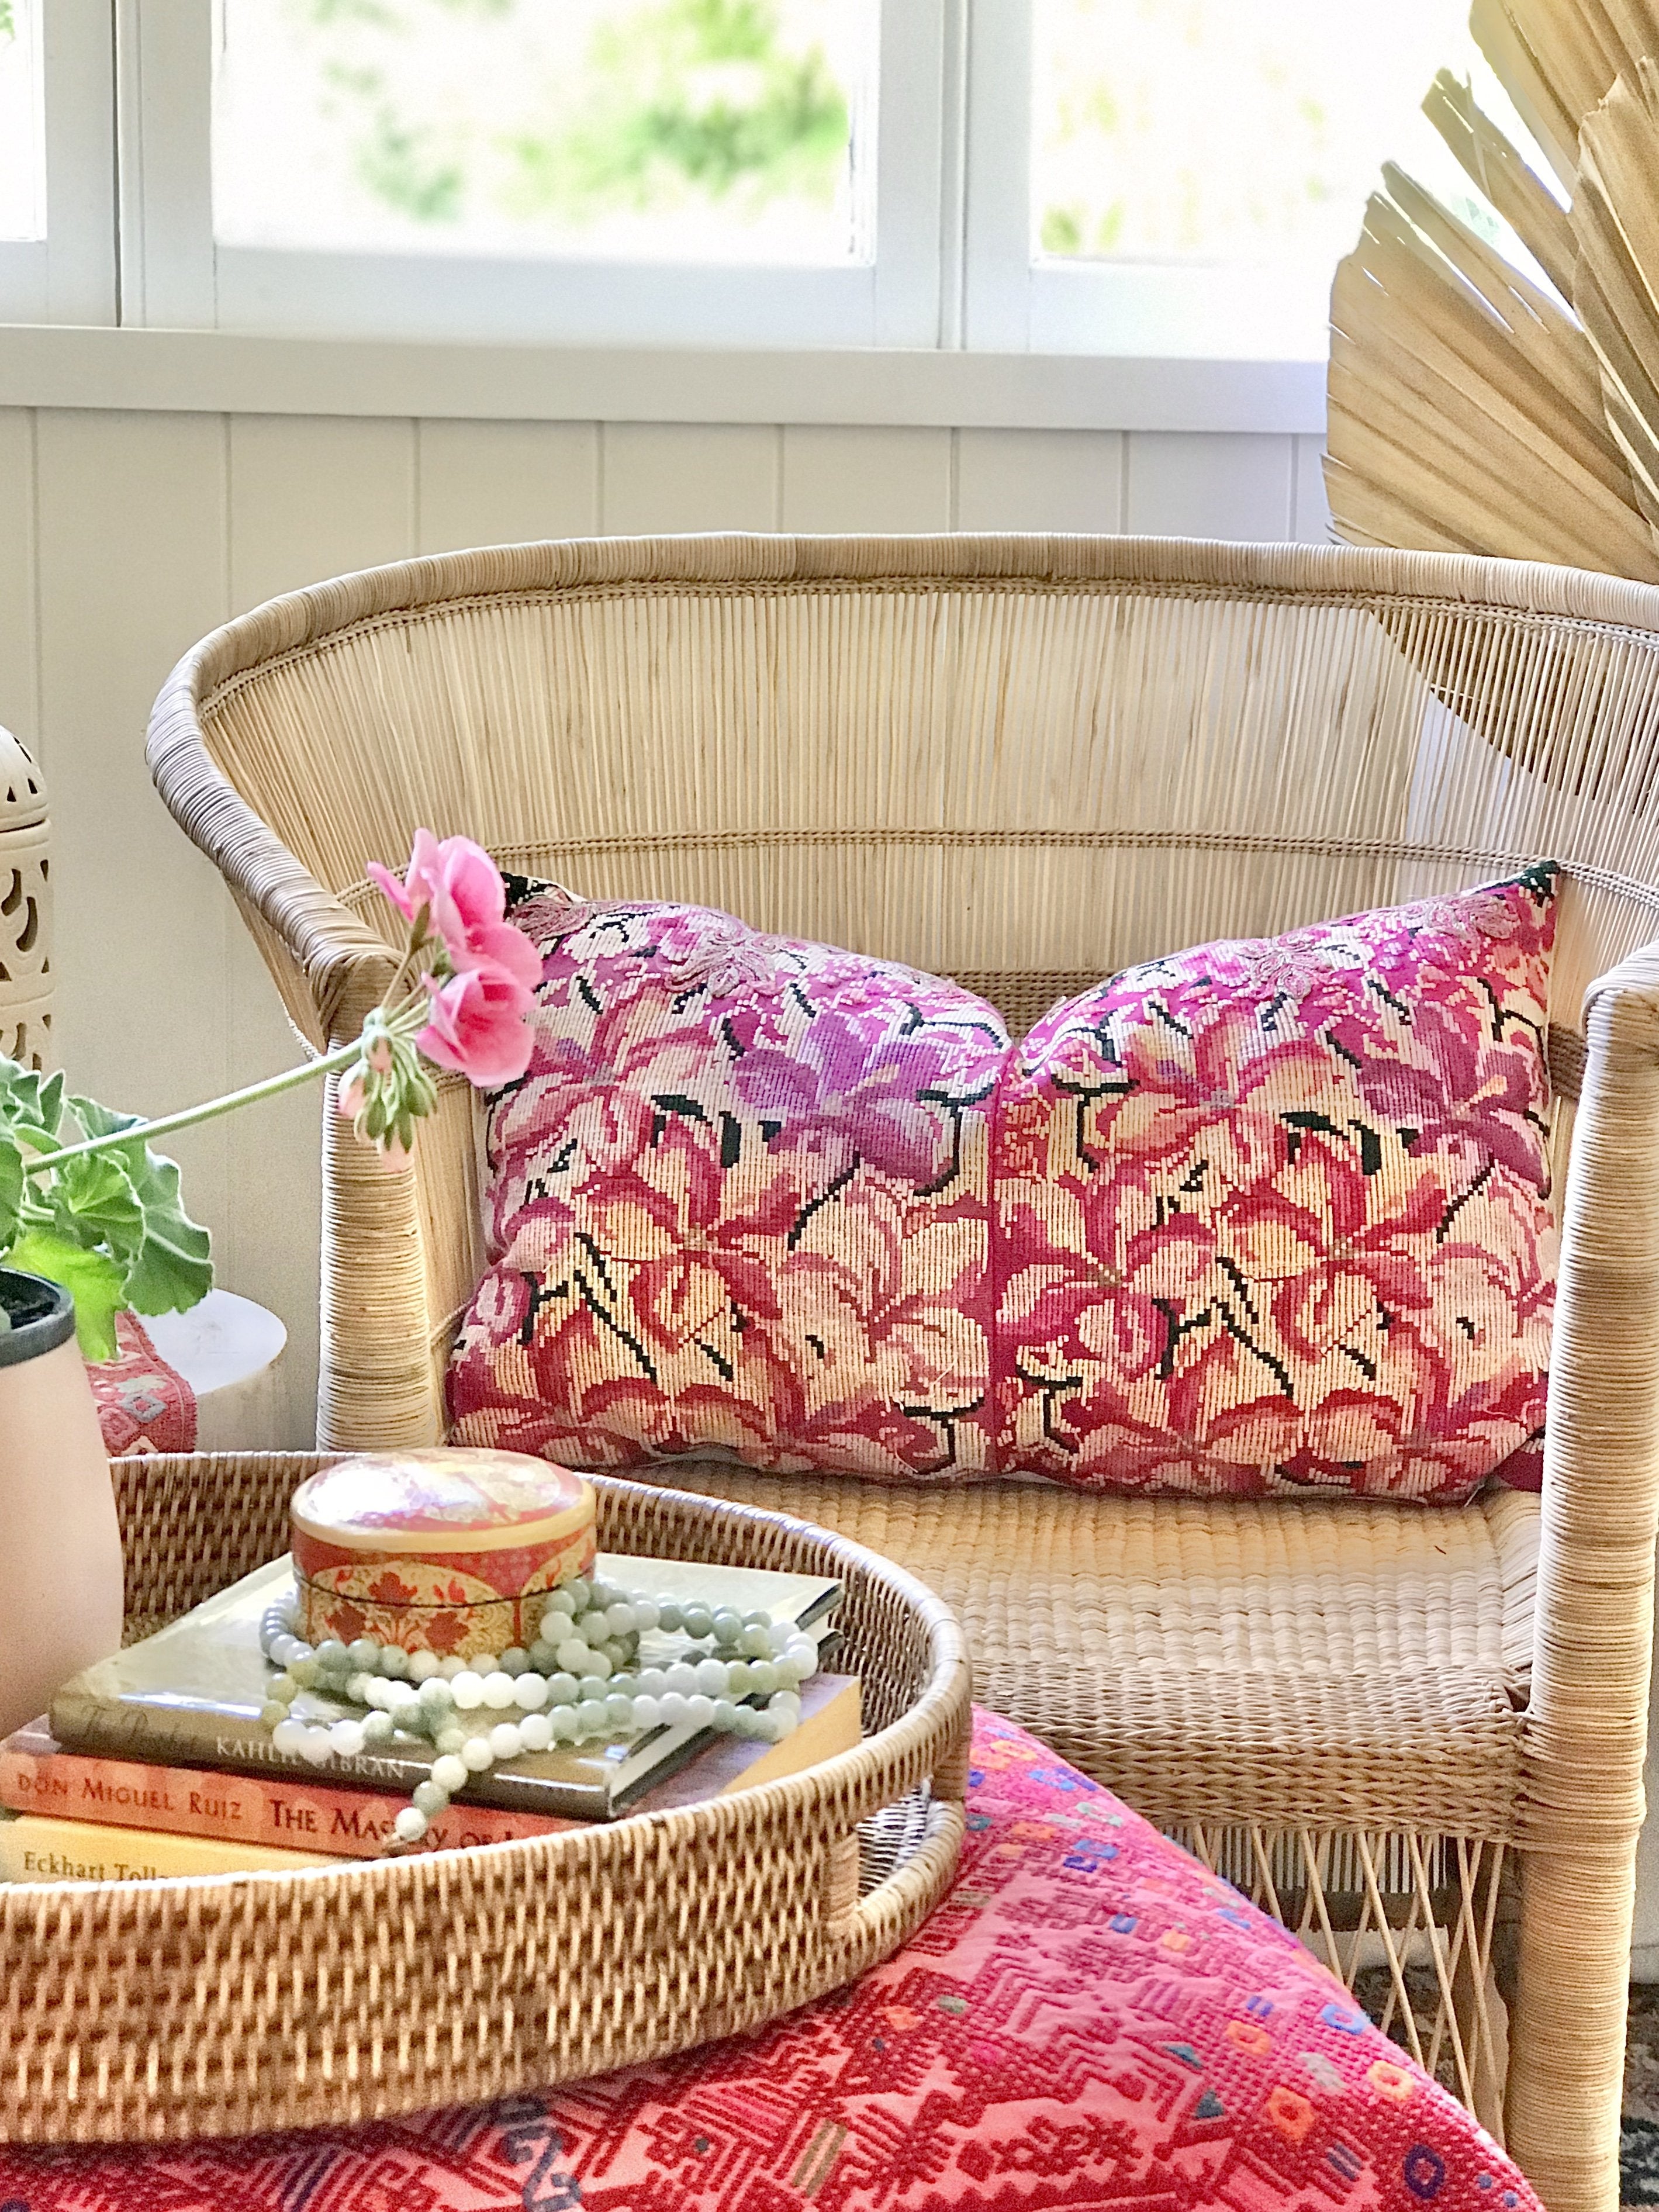 Guatemalan embroidered huipil pillow. A fuchsia vintage textile with an abstract floral design.